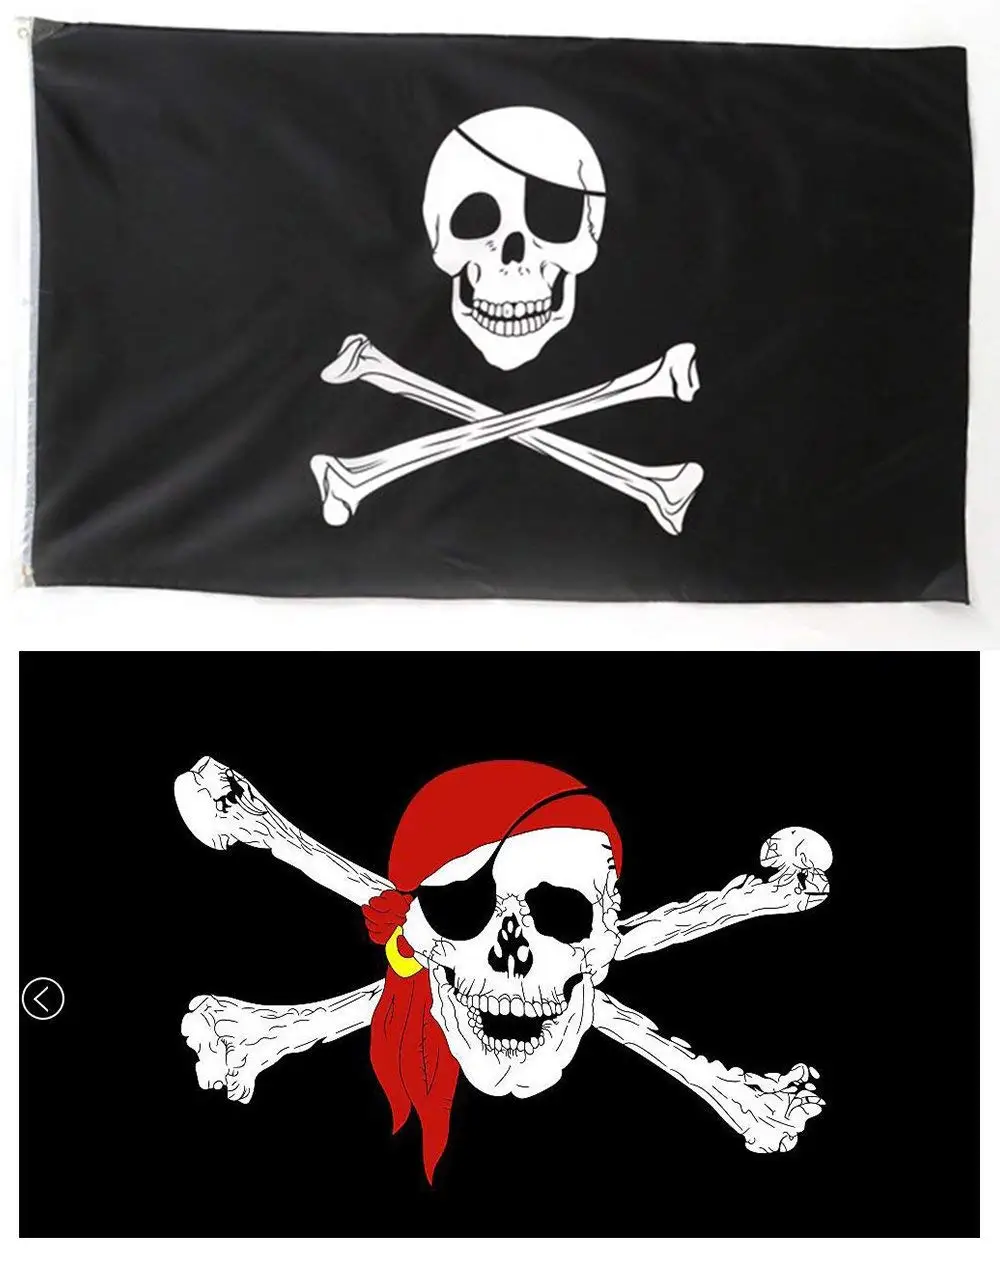 Pirate Anchor Flag 5 x 3 FT 100% Polyester With Eyelets Skull Bones Party